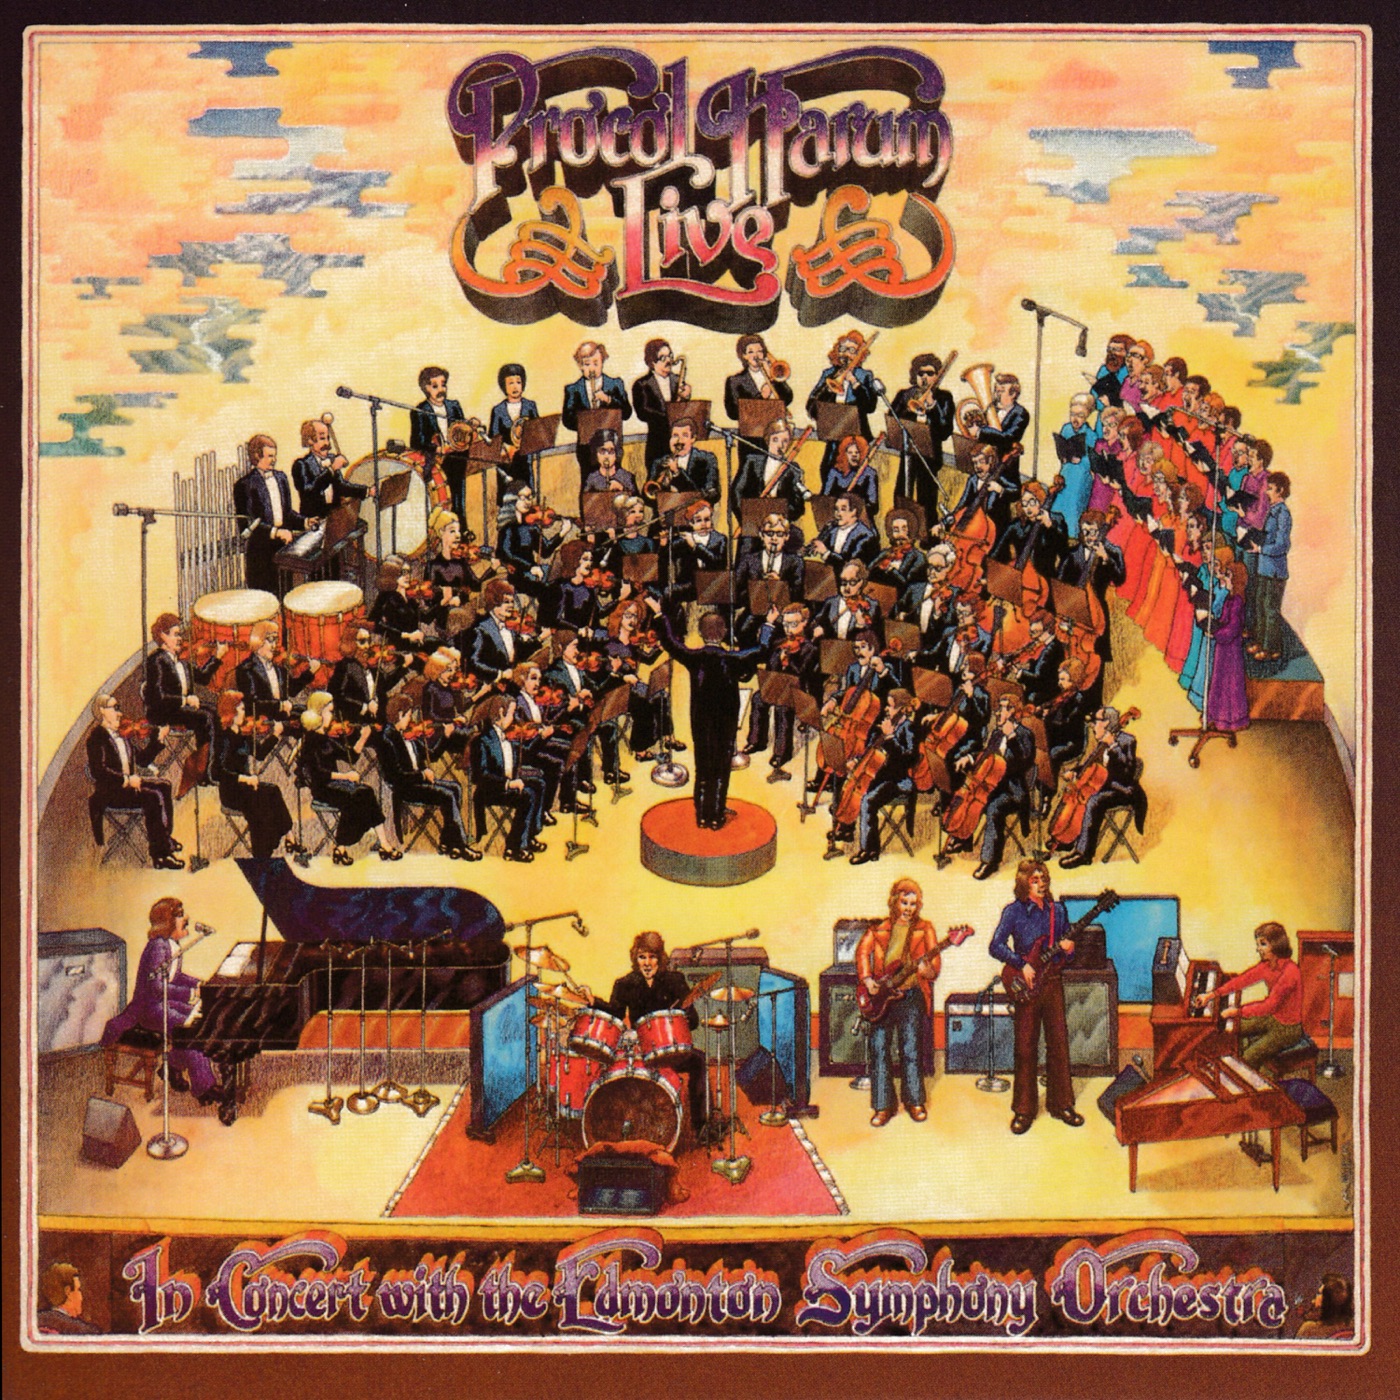 Procol Harum Live in Concert (with the Edmonton Symphony Orchestra) by Procol Harum, Edmonton Symphony Orchestra